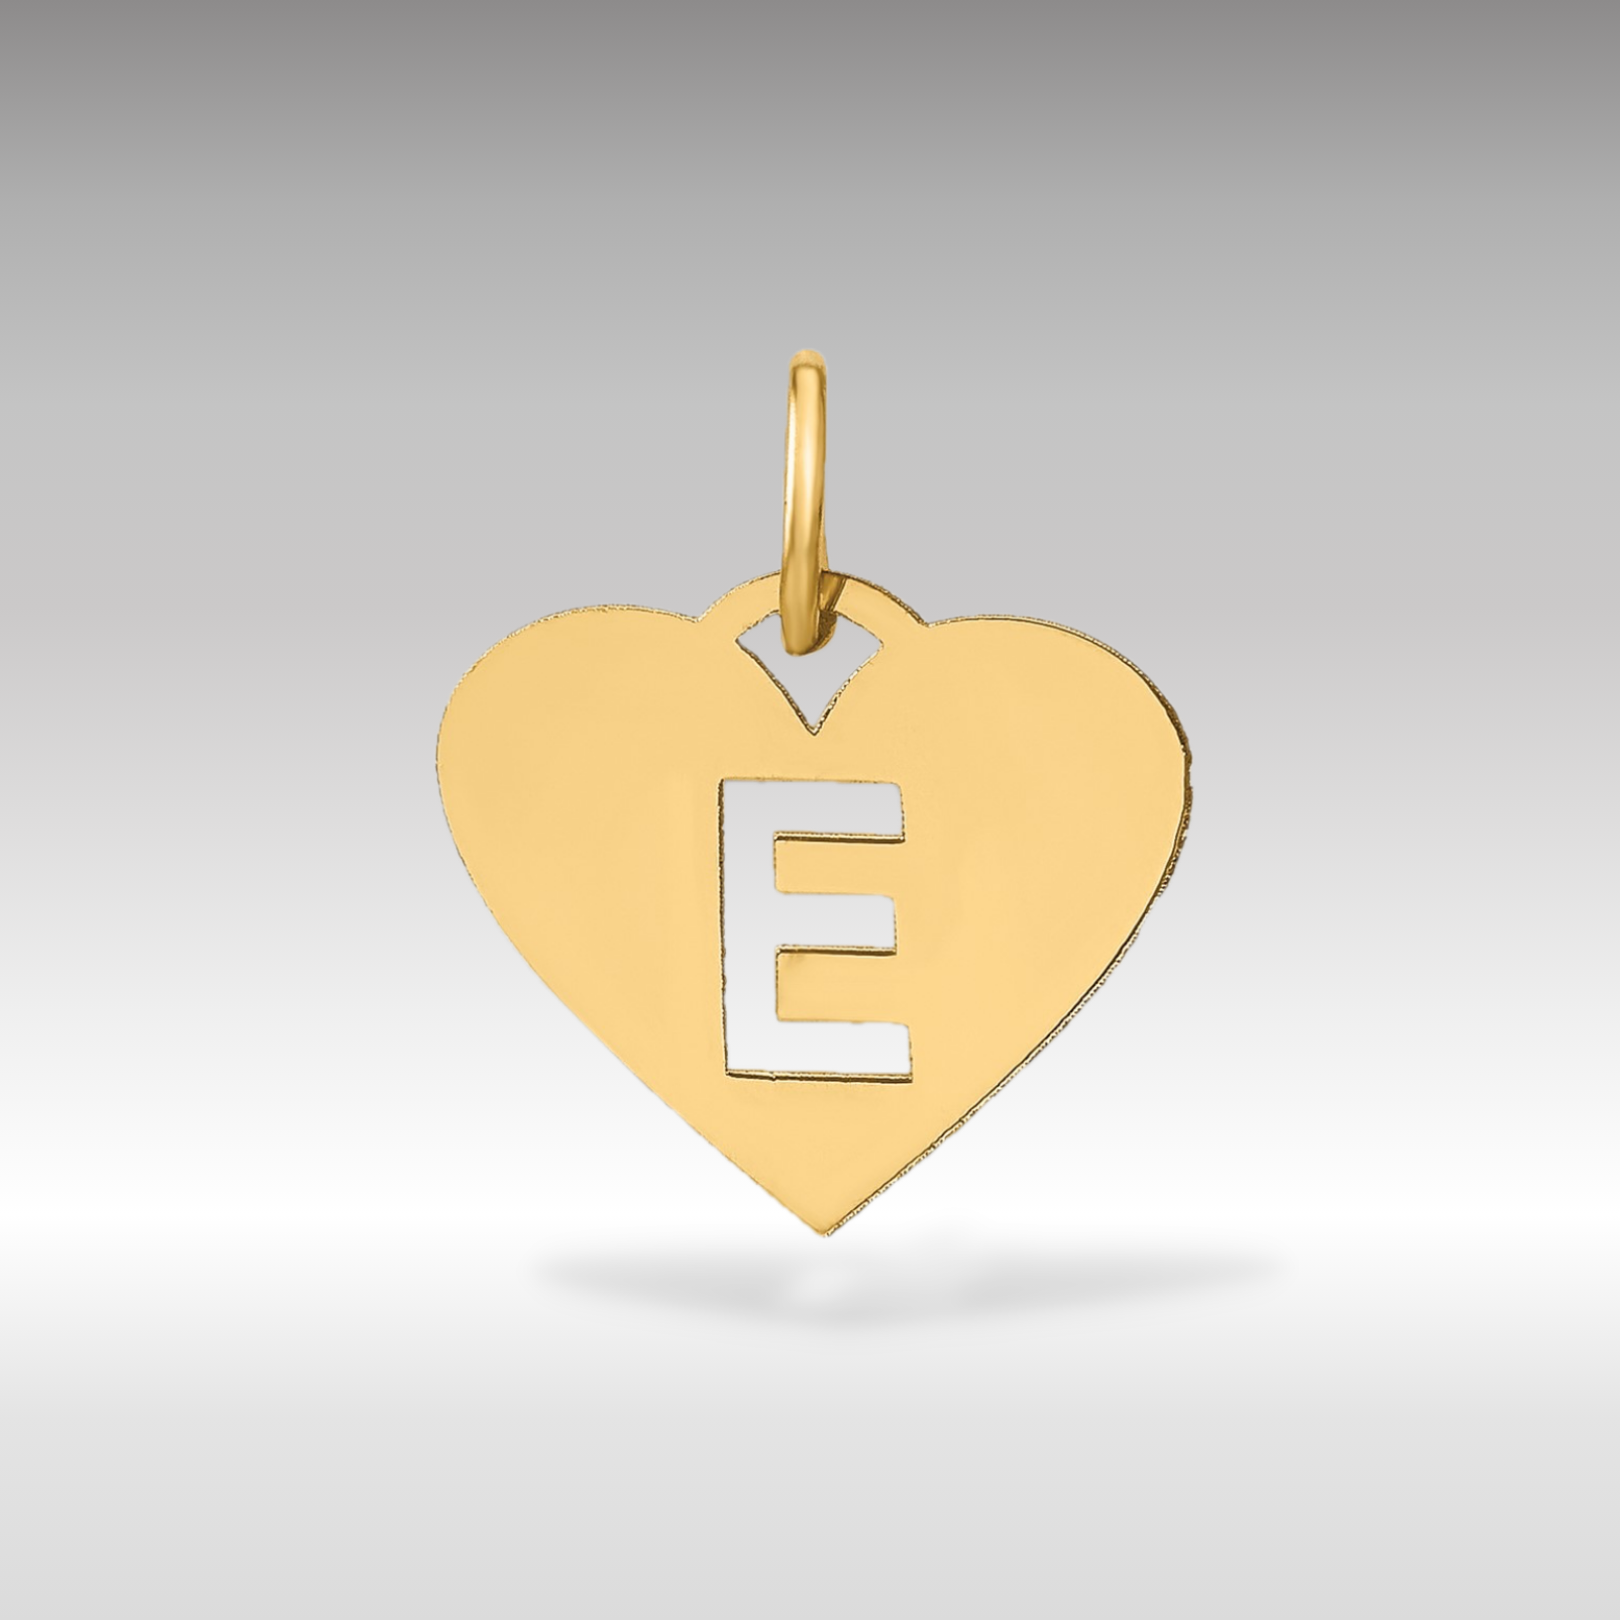 14K Gold Heart Pendant with Letter 'E' - Charlie & Co. Jewelry